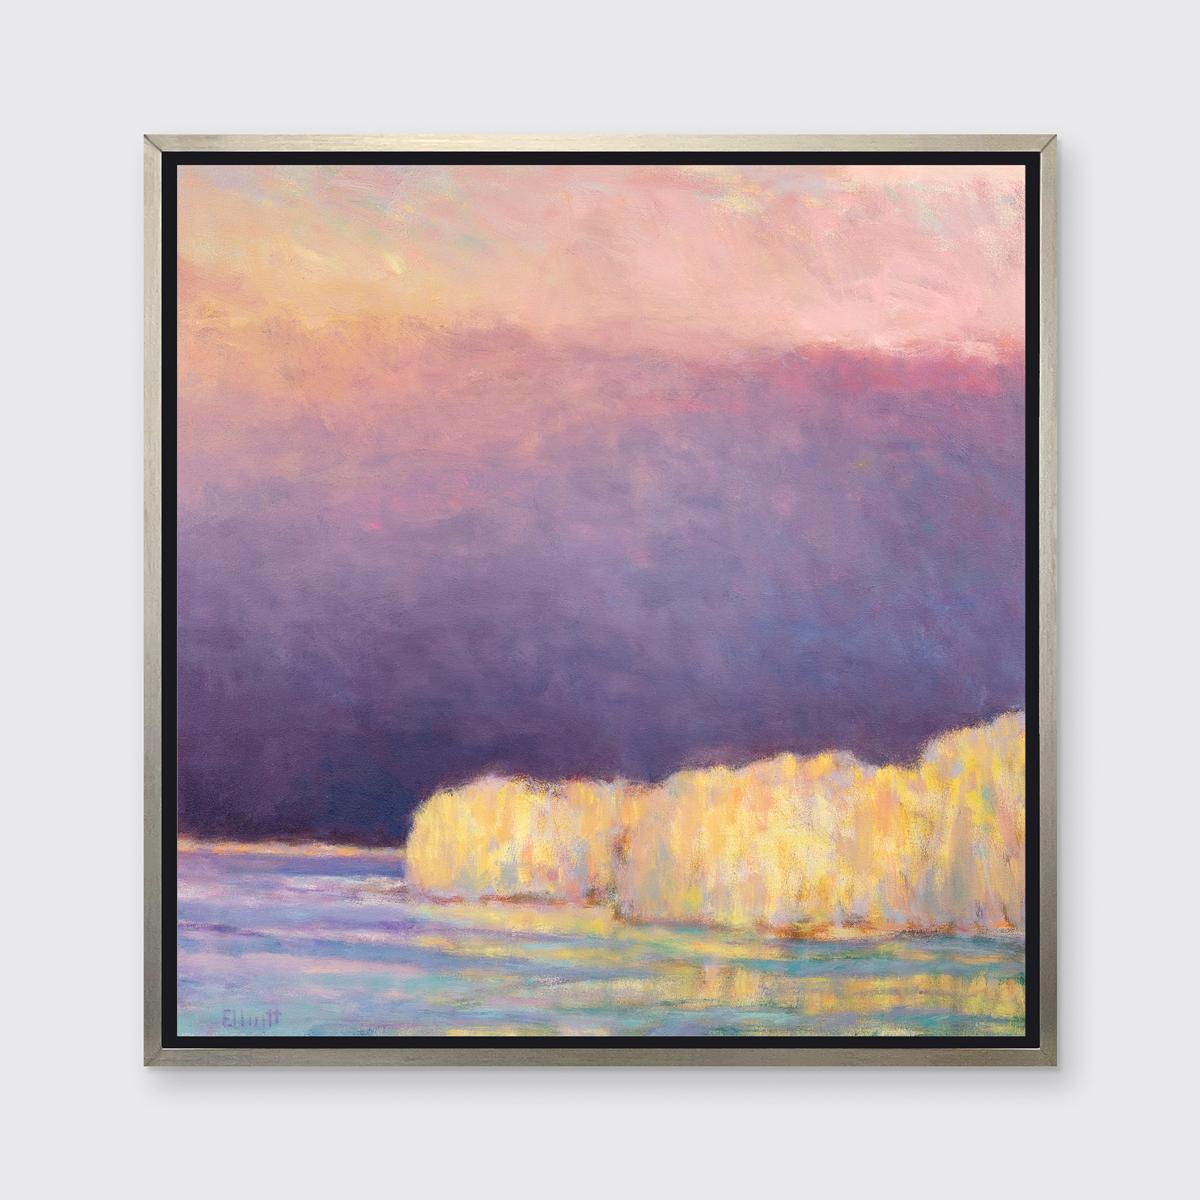 This abstract landscape limited edition print by Ken Elliott features a predominately cool violet palette, which is offset by the warm yellow trees in the foreground, which are reflected in the ground beneath it. It is an edition size of 195.